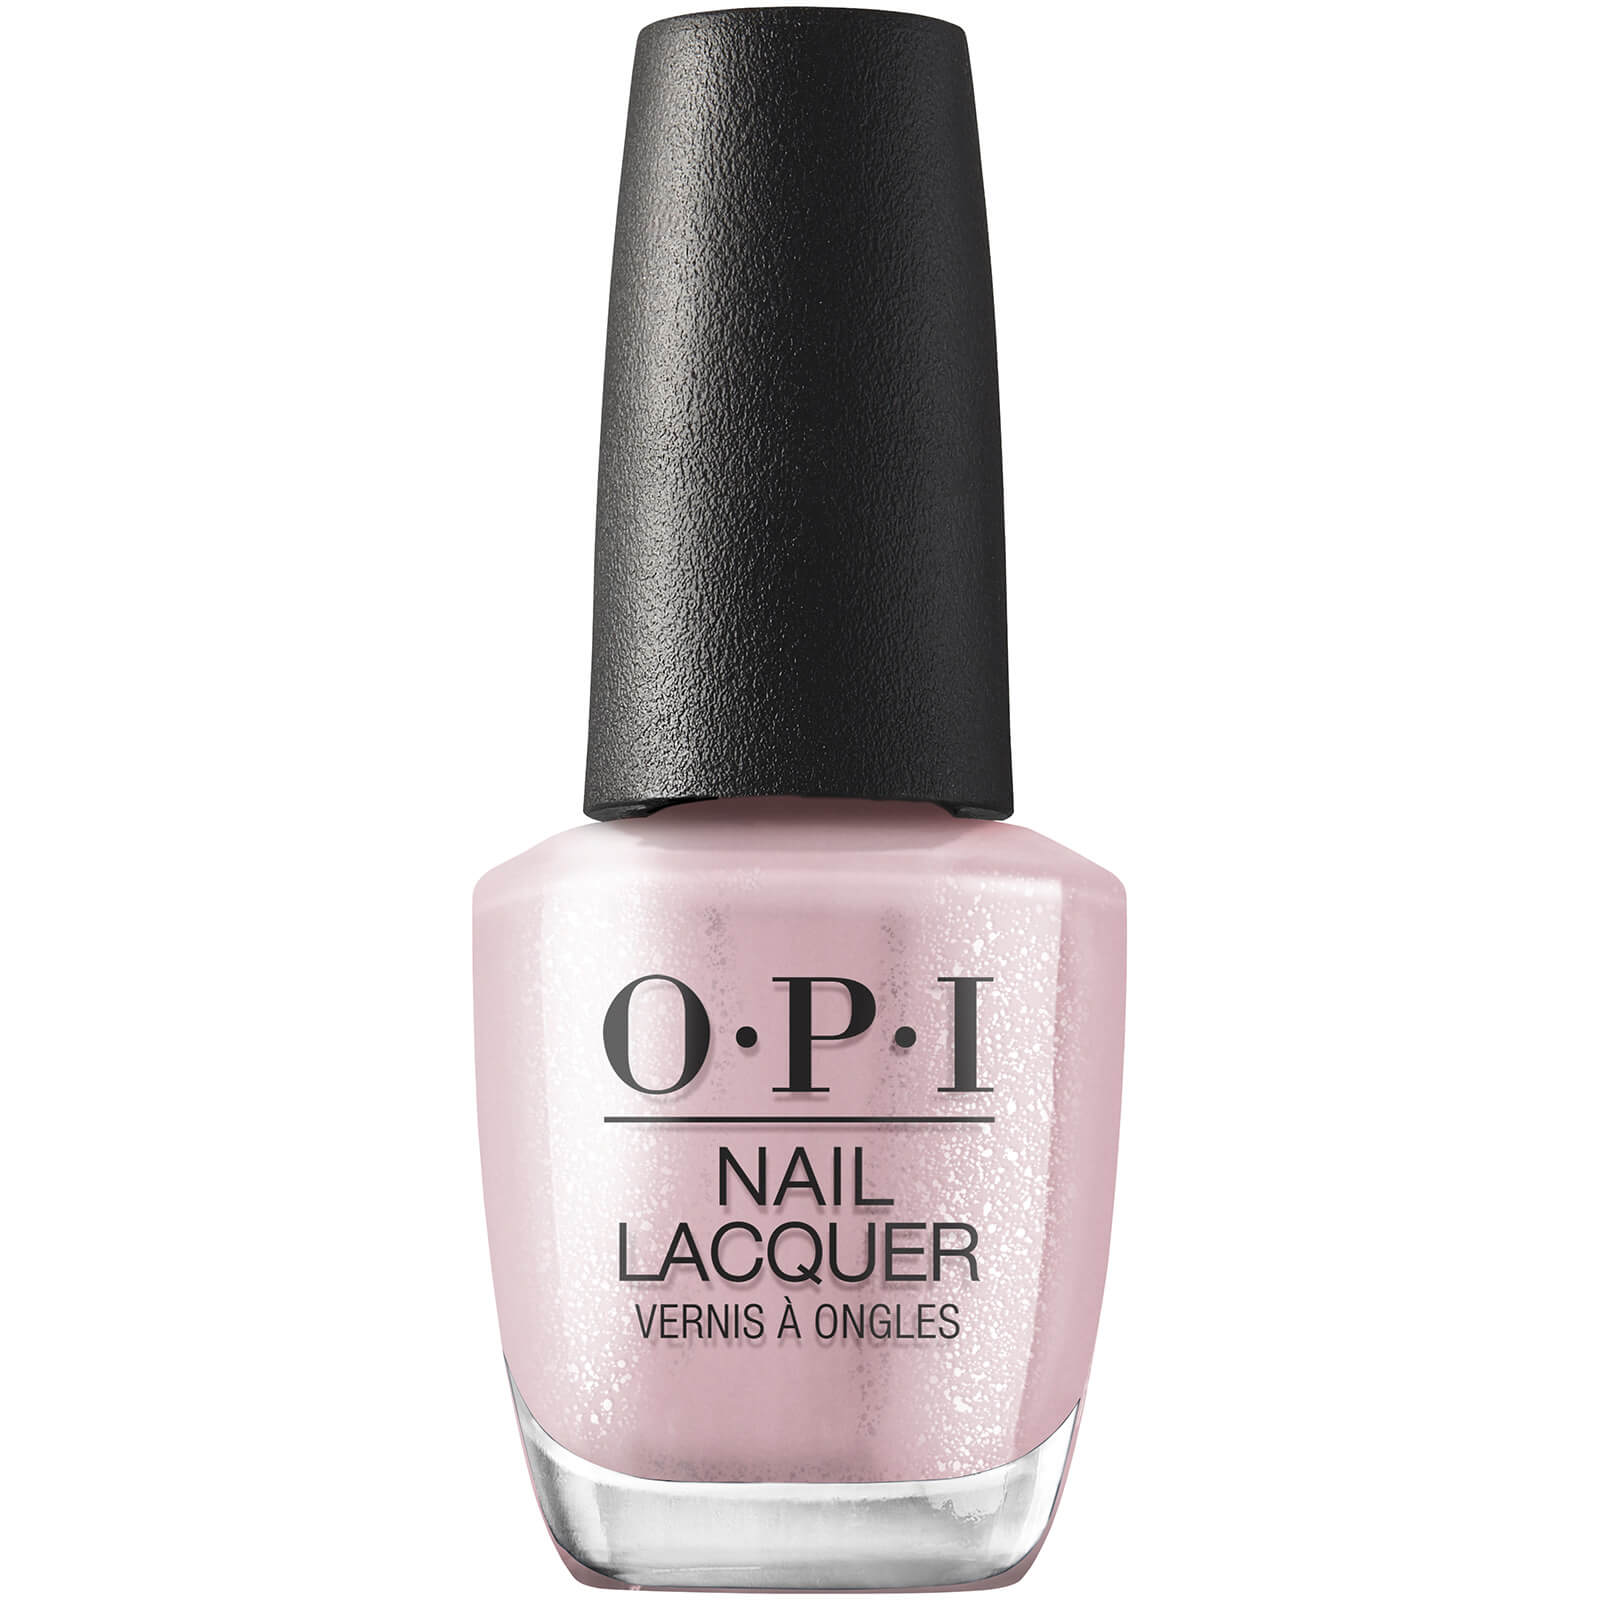 Image of OPI Nail Polish Xbox Collection 15ml (Various Shades) - Quest for Quartz